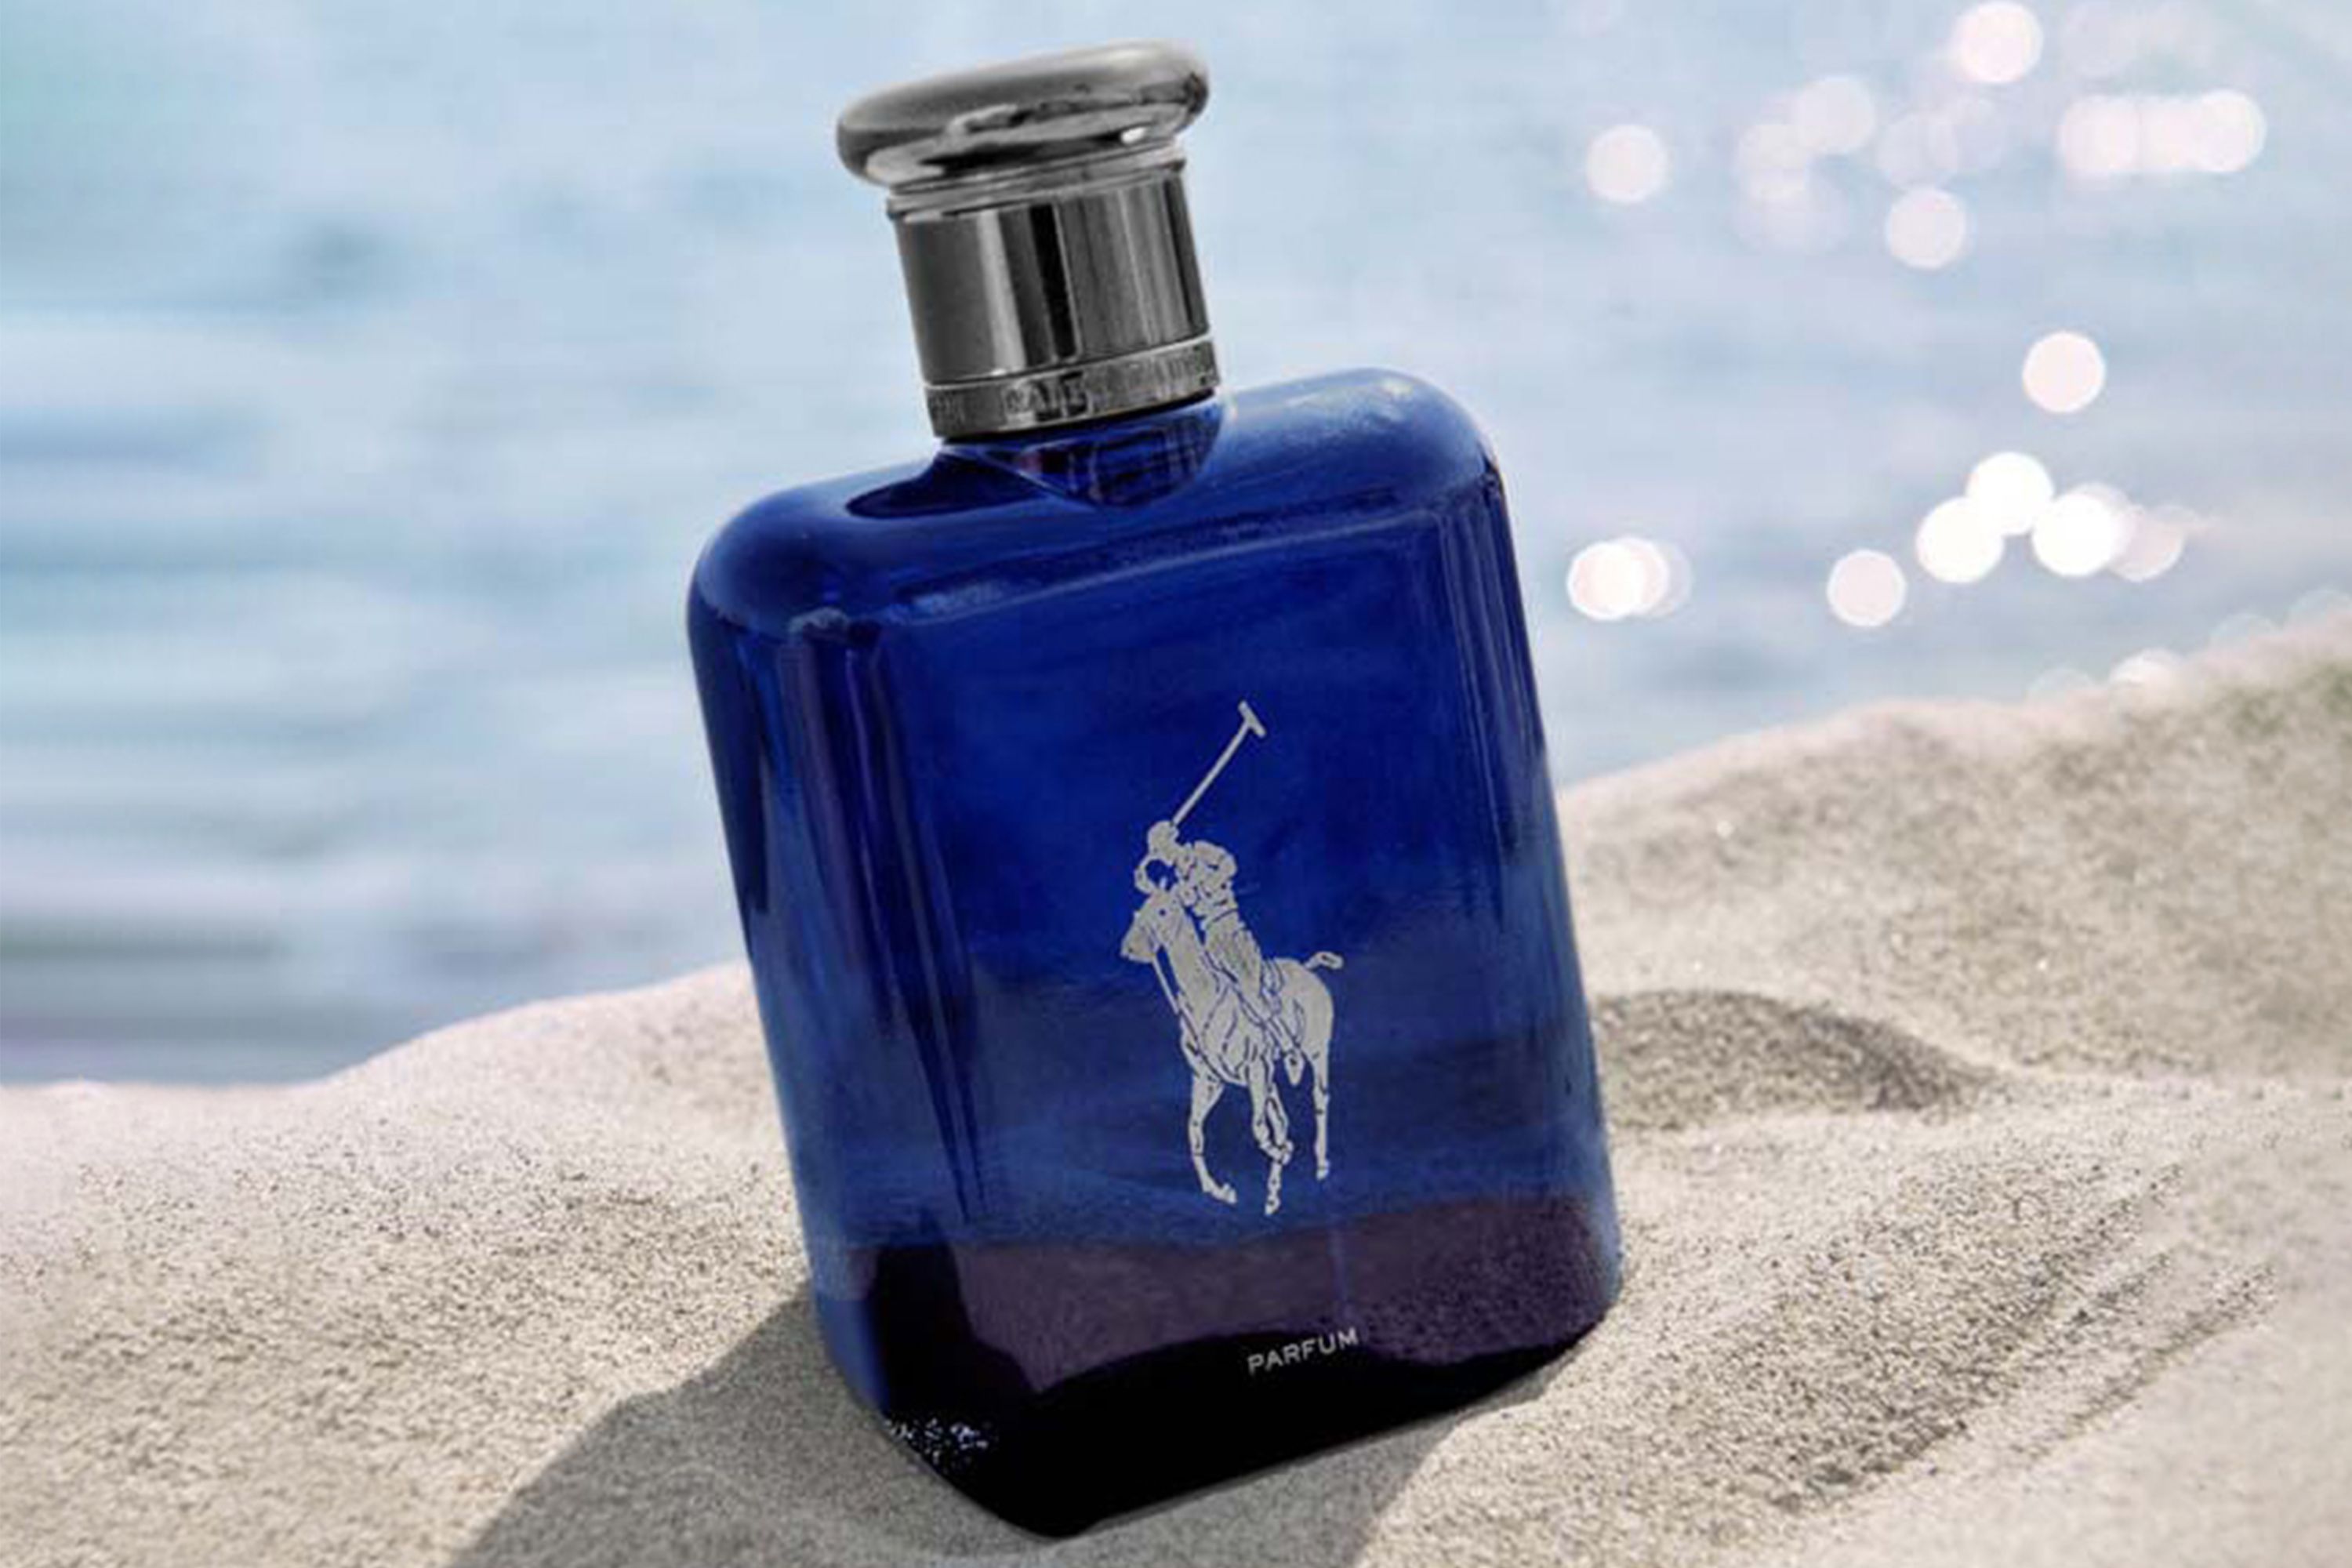 Ralph Lauren's Polo Blue: The Coming-of-Age Scent of the Early